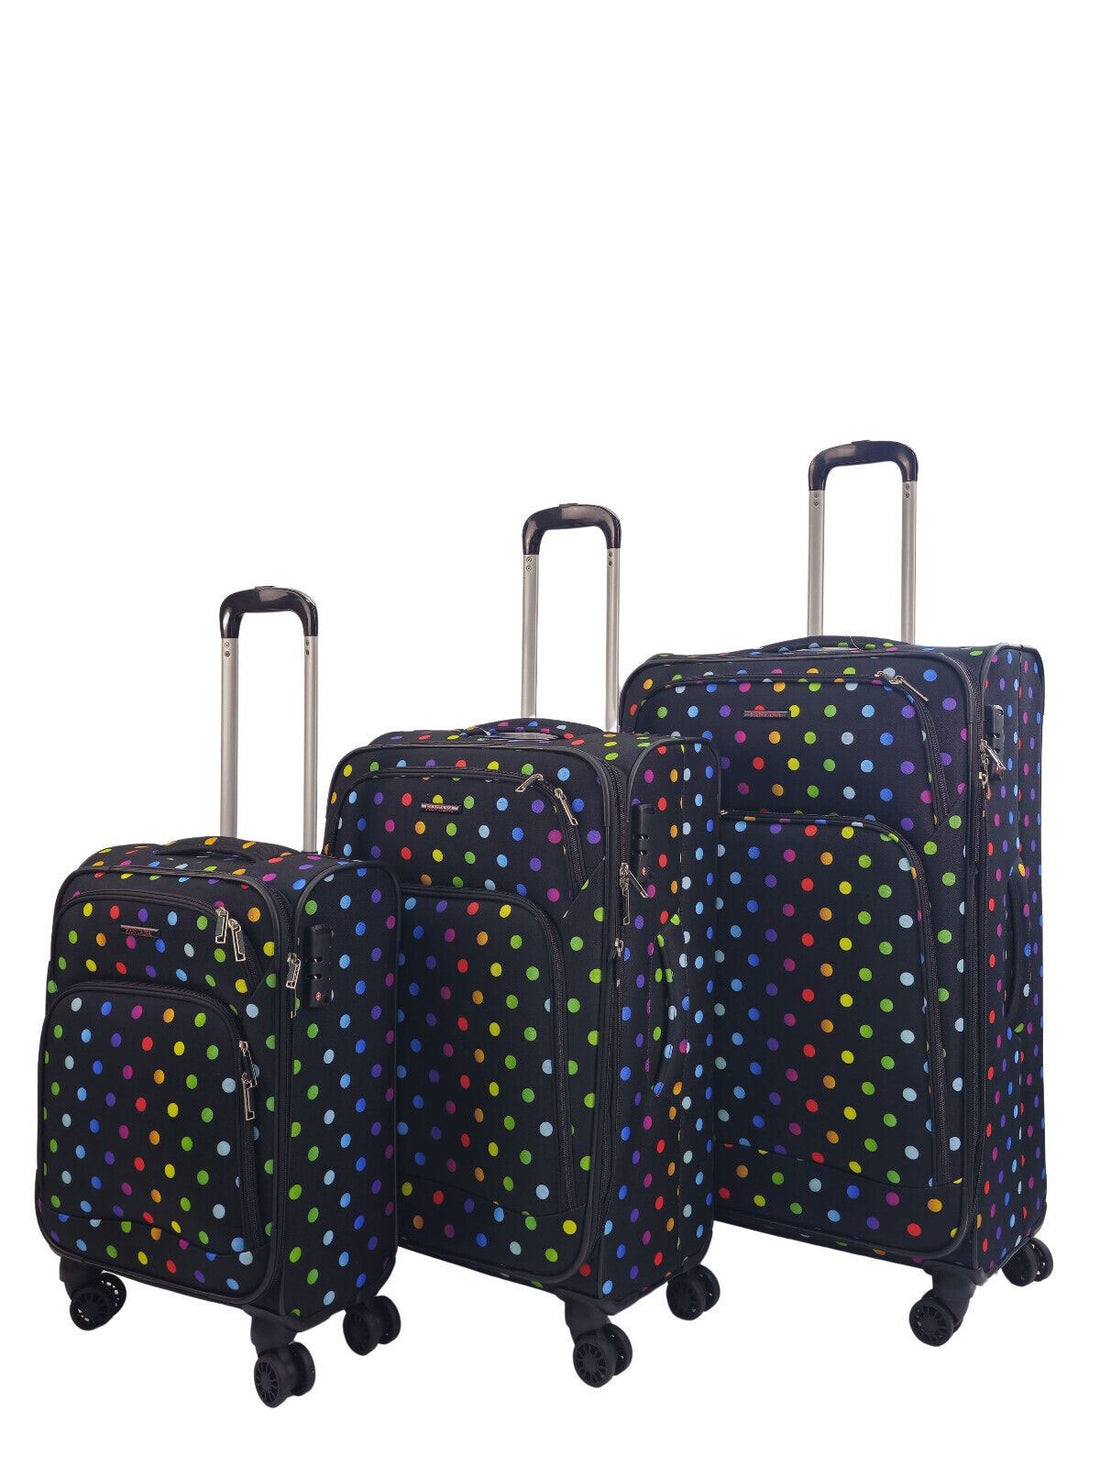 Ashville Set of 3 Soft Shell Suitcase in Dots